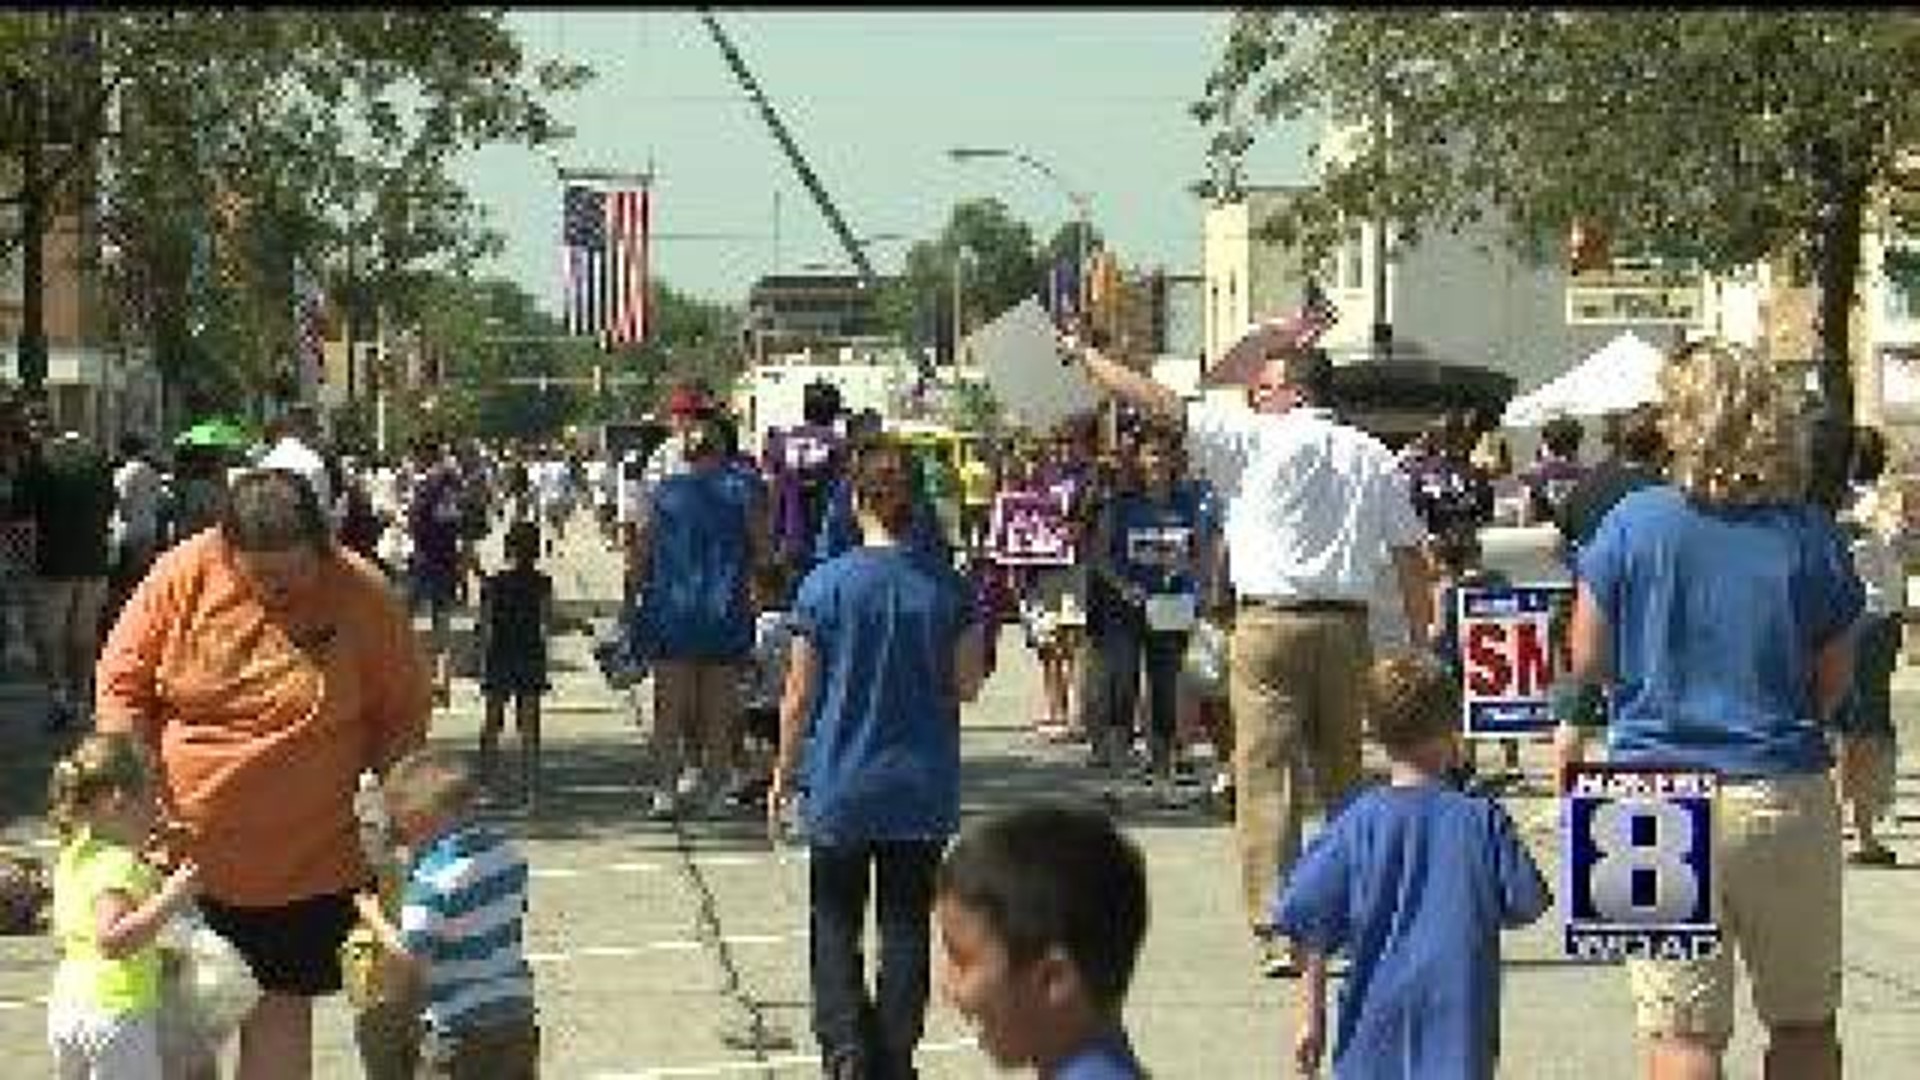 Labor Day events mark the sprint to the finish for political candidates